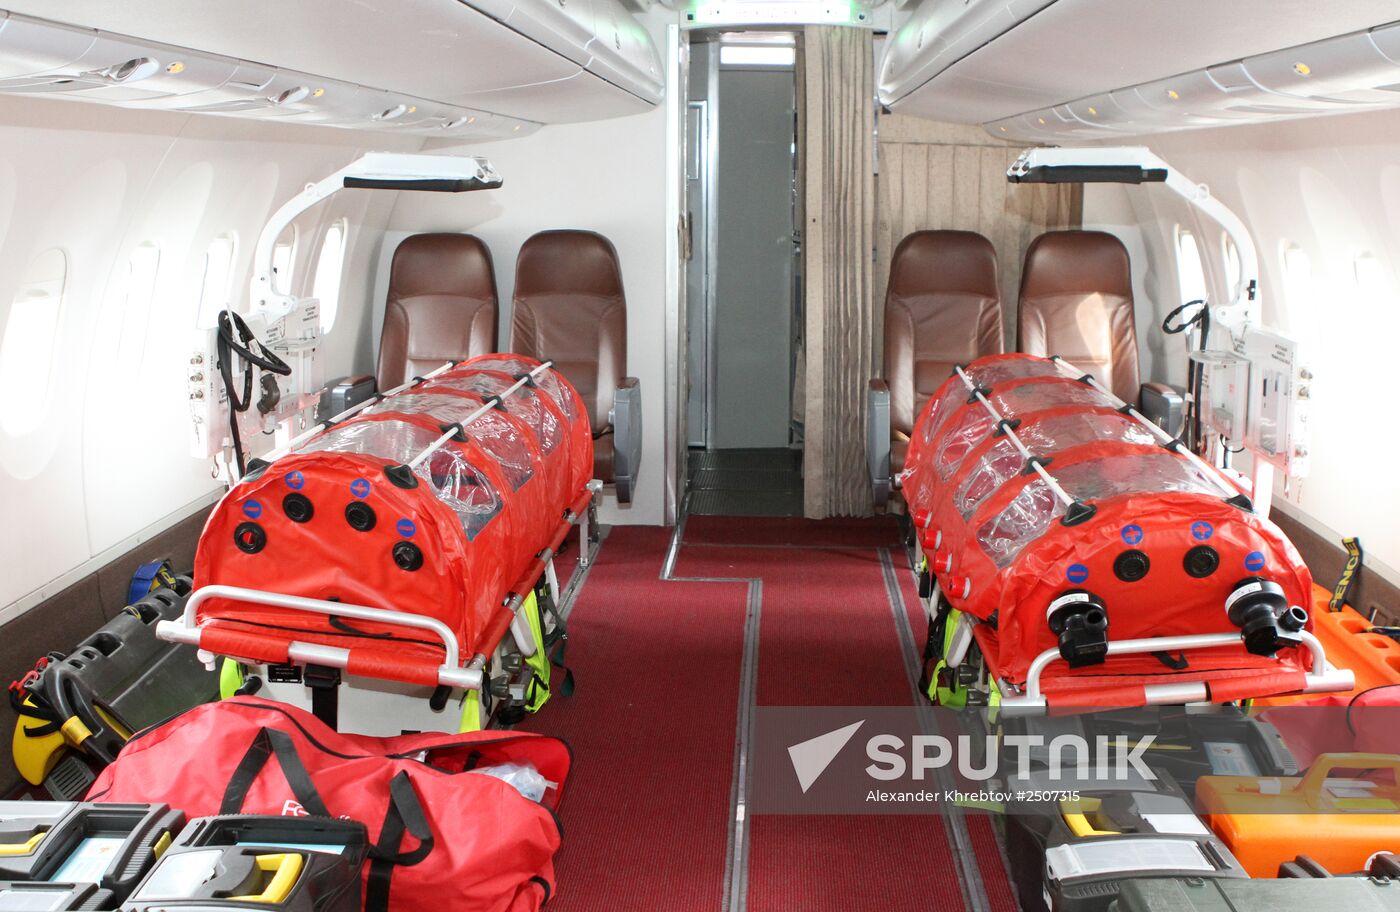 Presentation of aircraft equipped to transport Ebola patients